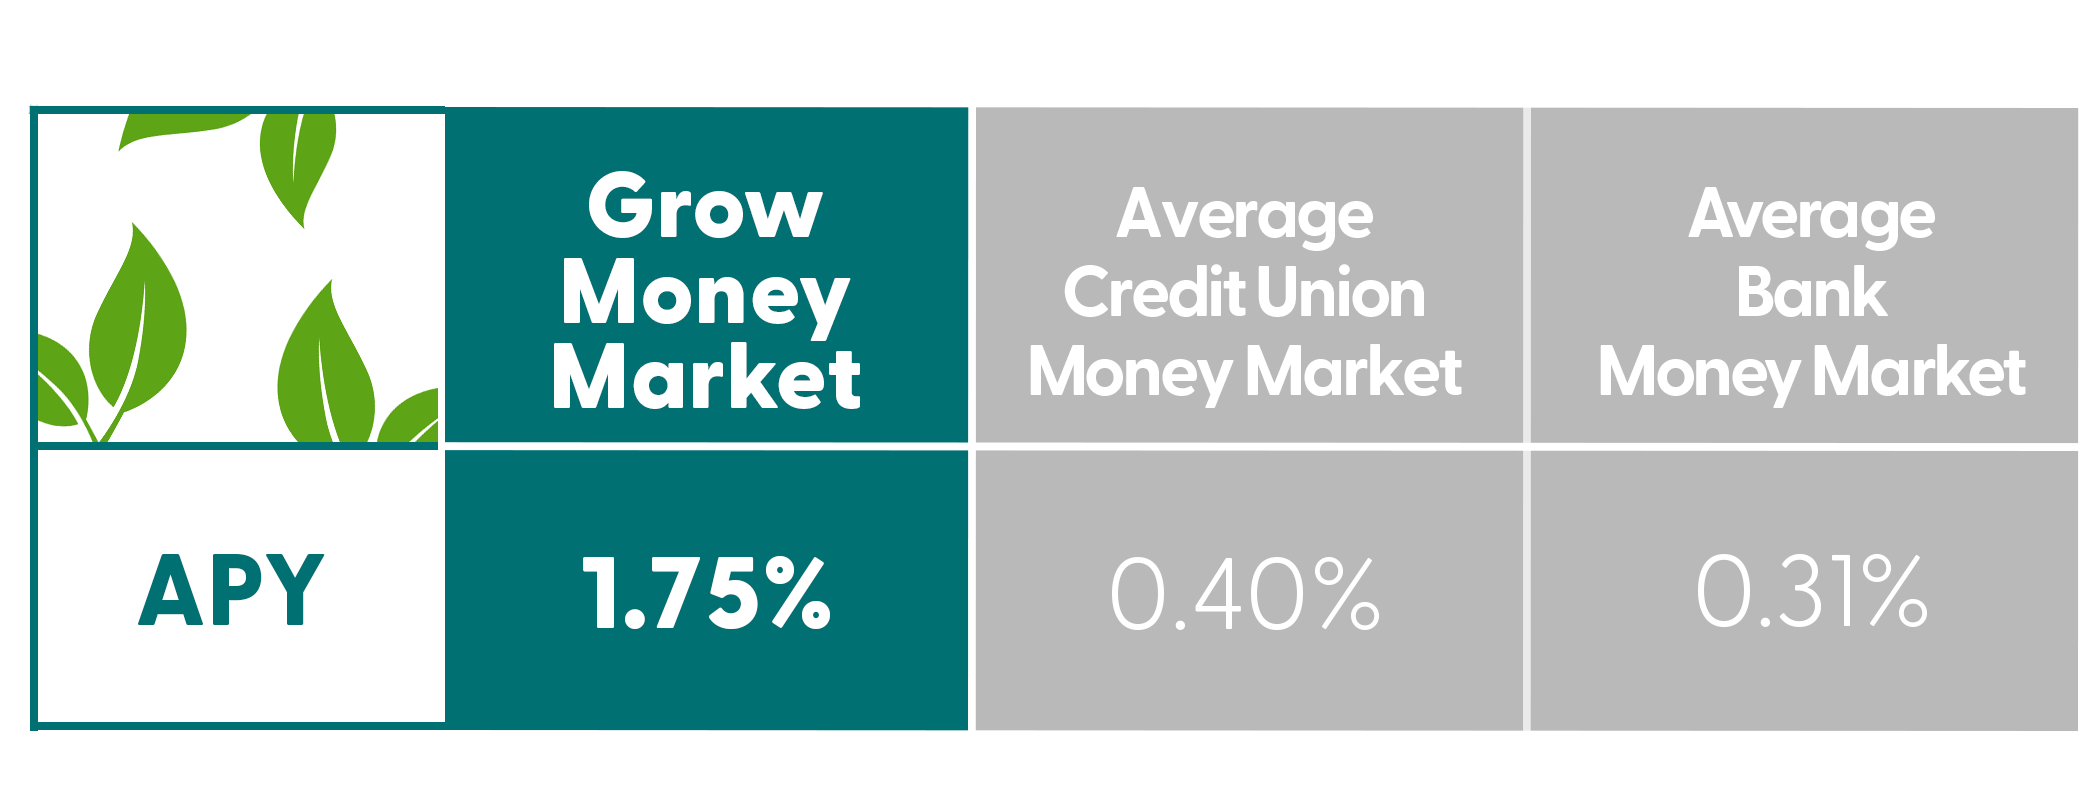 Earn 1.00% APY with the Sandia Area Grow Money Market Account! Compare to the National Average and see how you can start saving today.